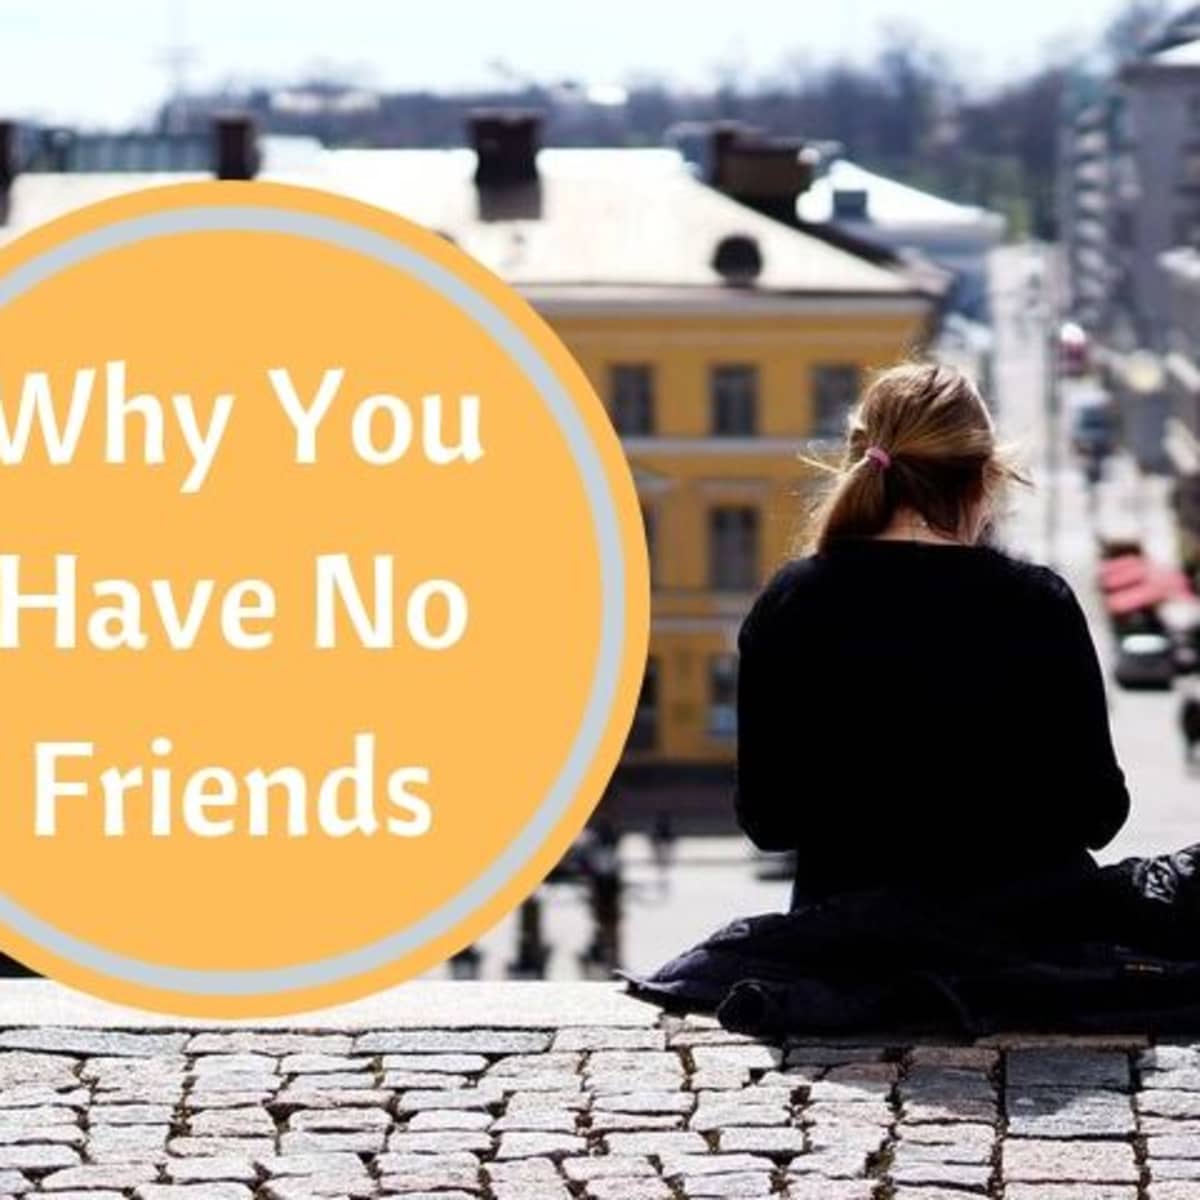 I have friends why no “Why do